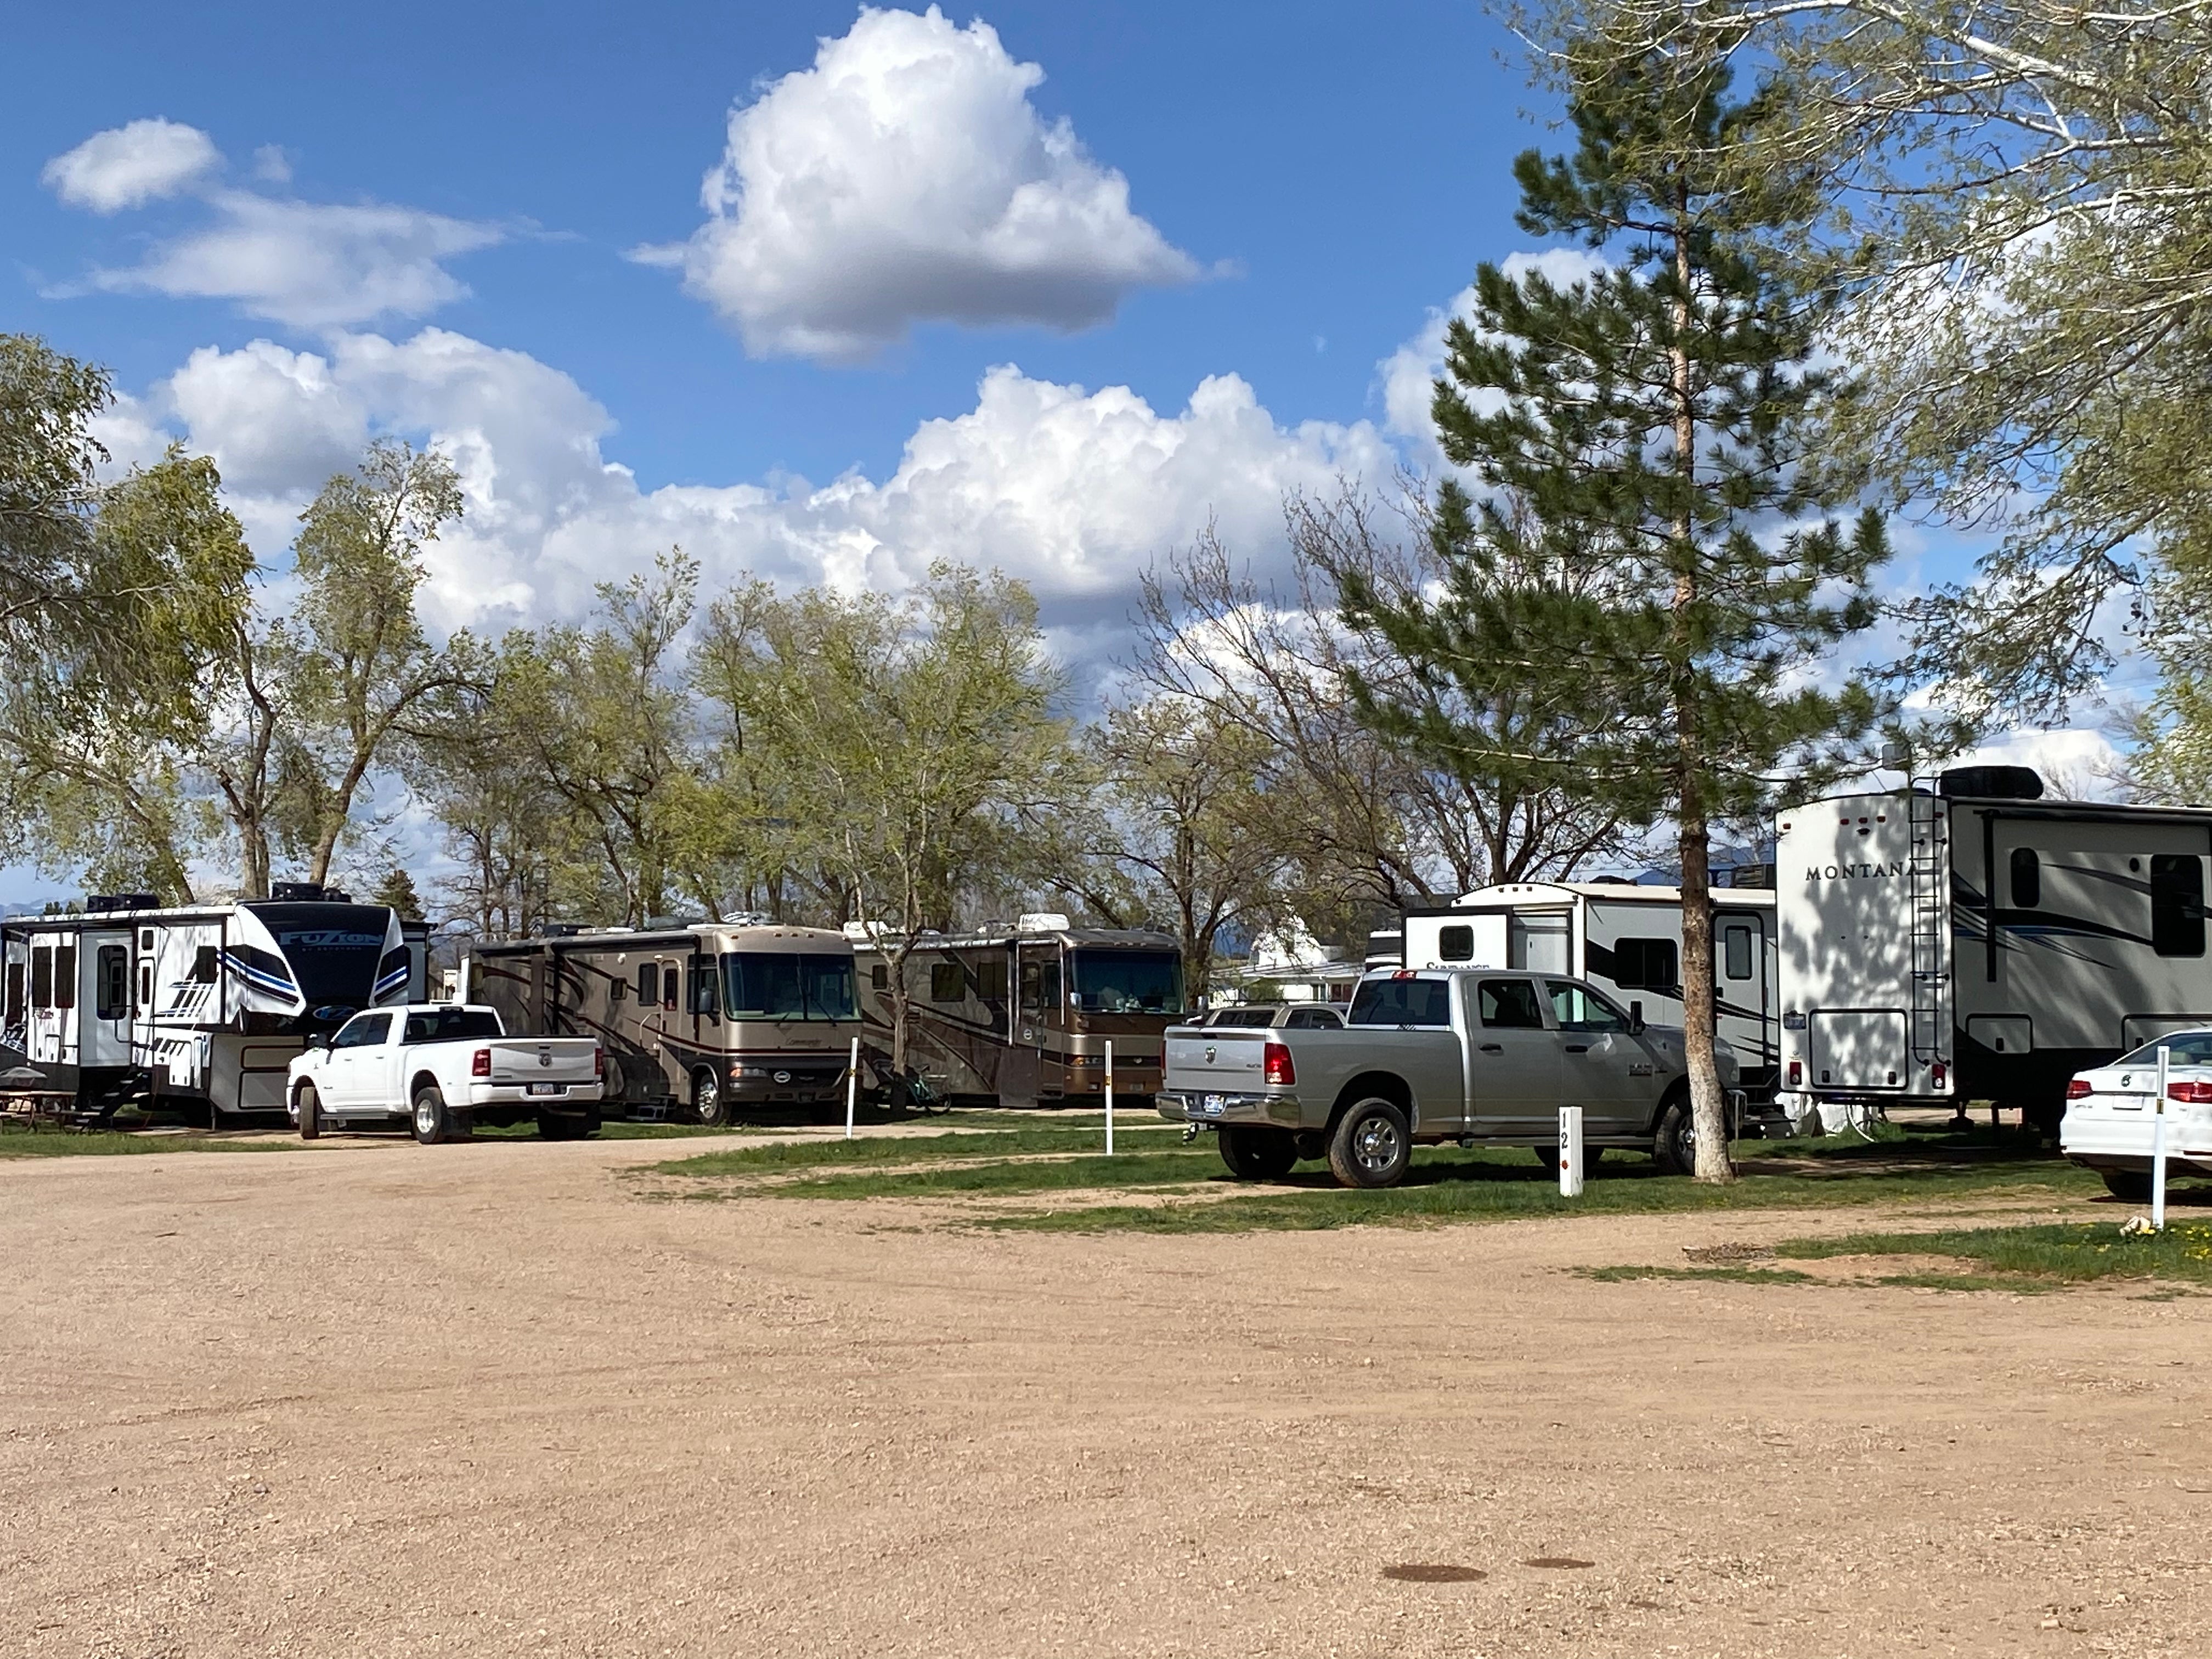 Camper submitted image from Wagons West RV Campground - 5